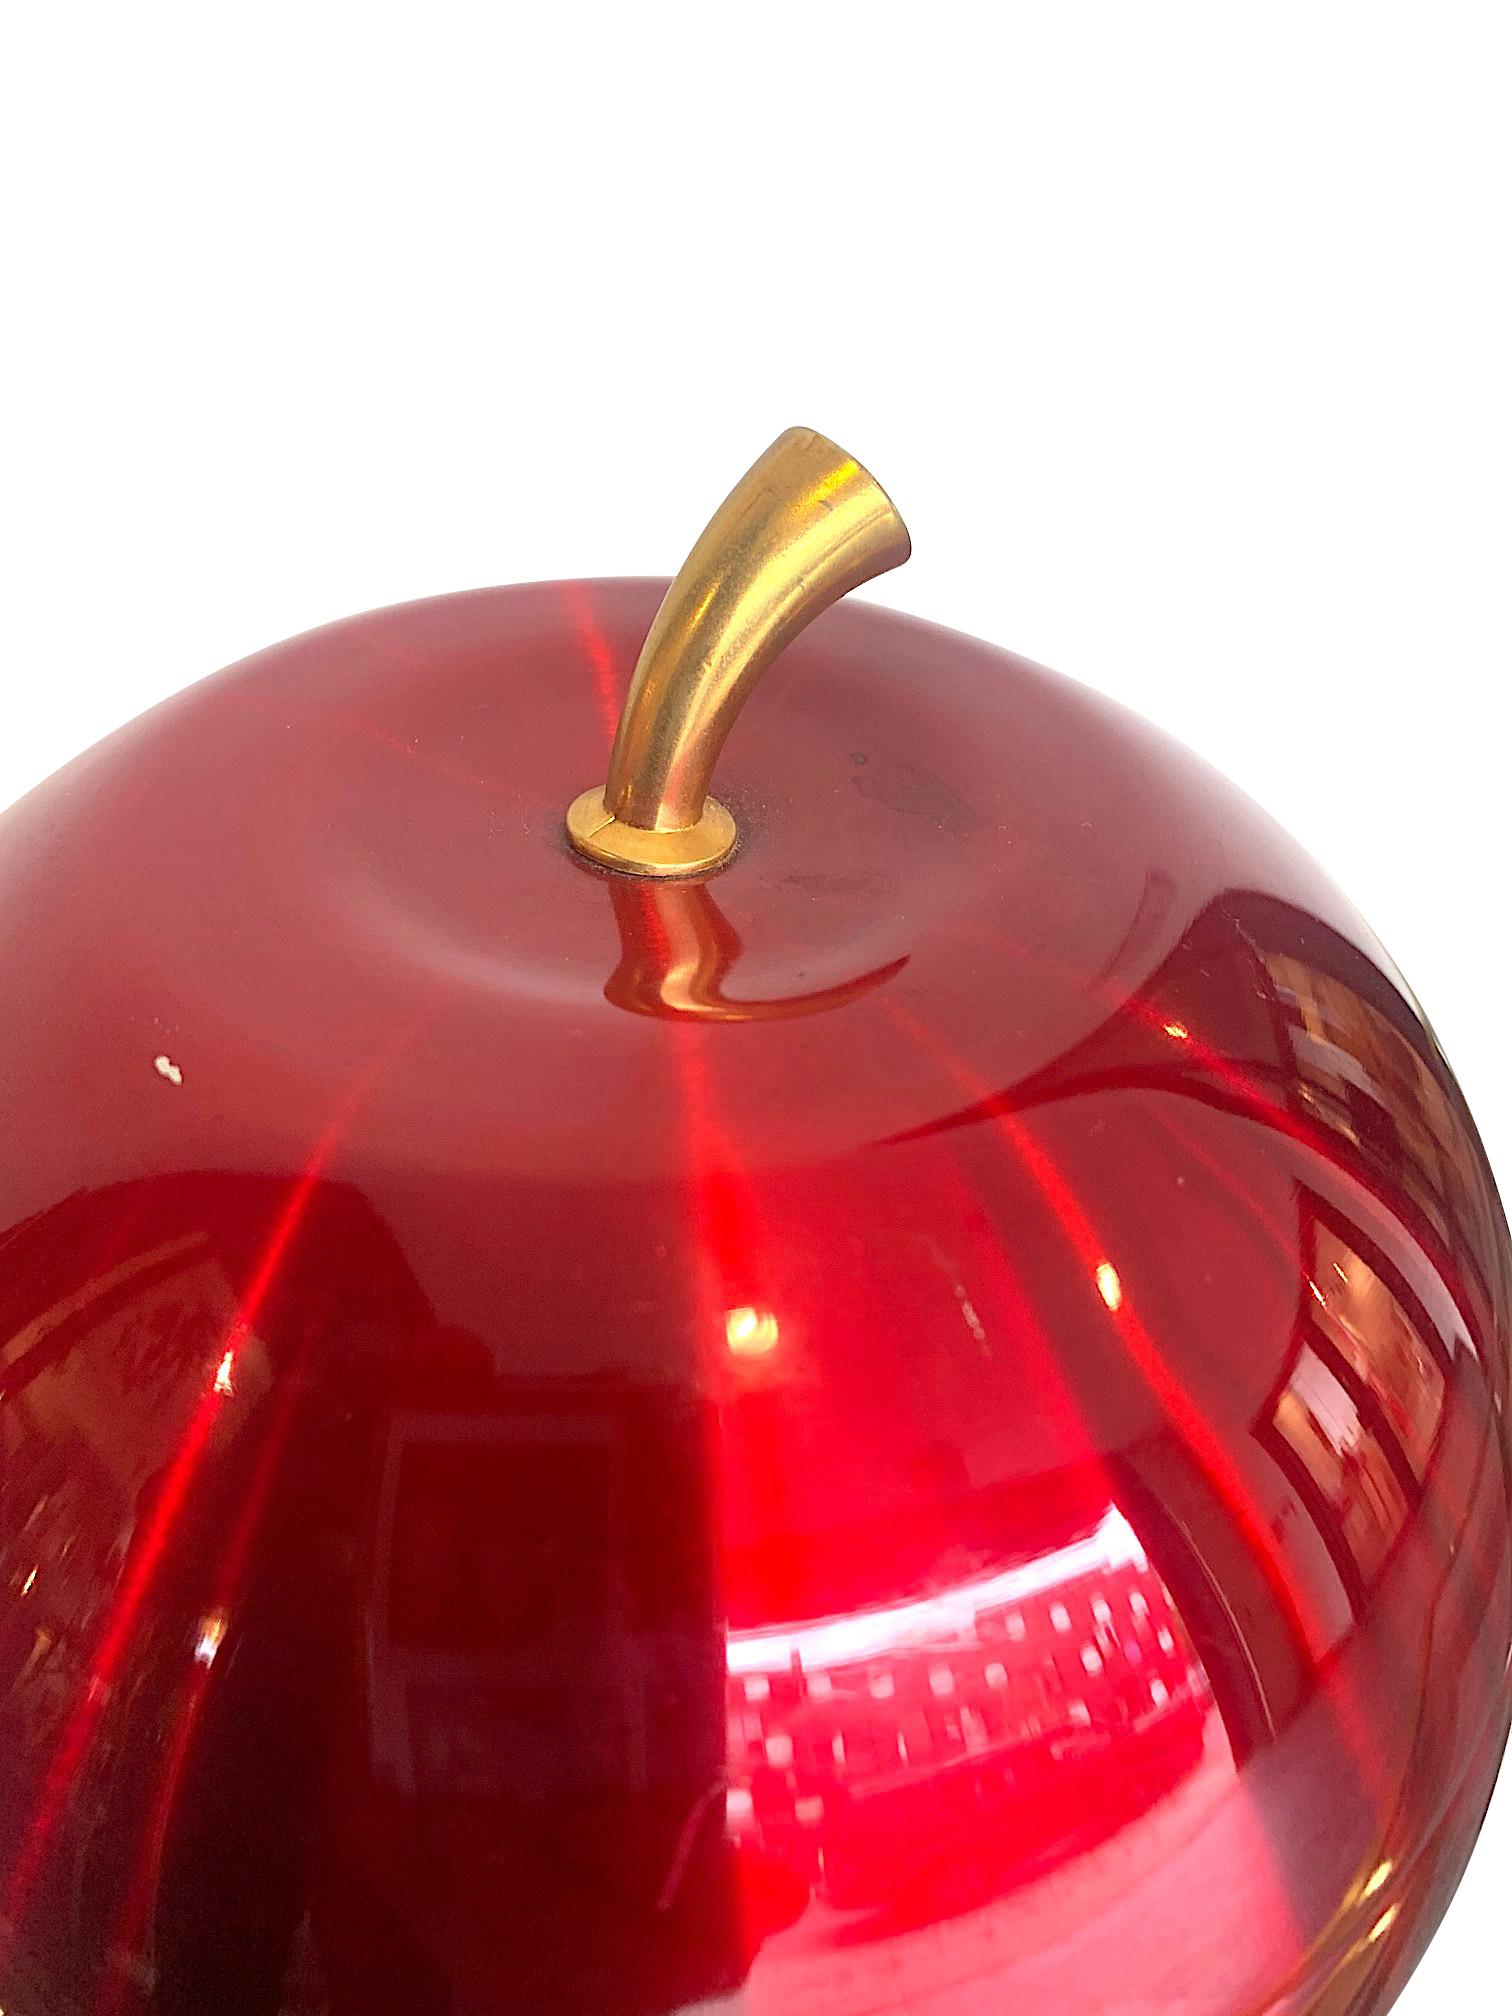 Mid-Century Modern 1970s Apple Ice Bucket by Daydream in Anodised Vibrant Red with Brass Handle